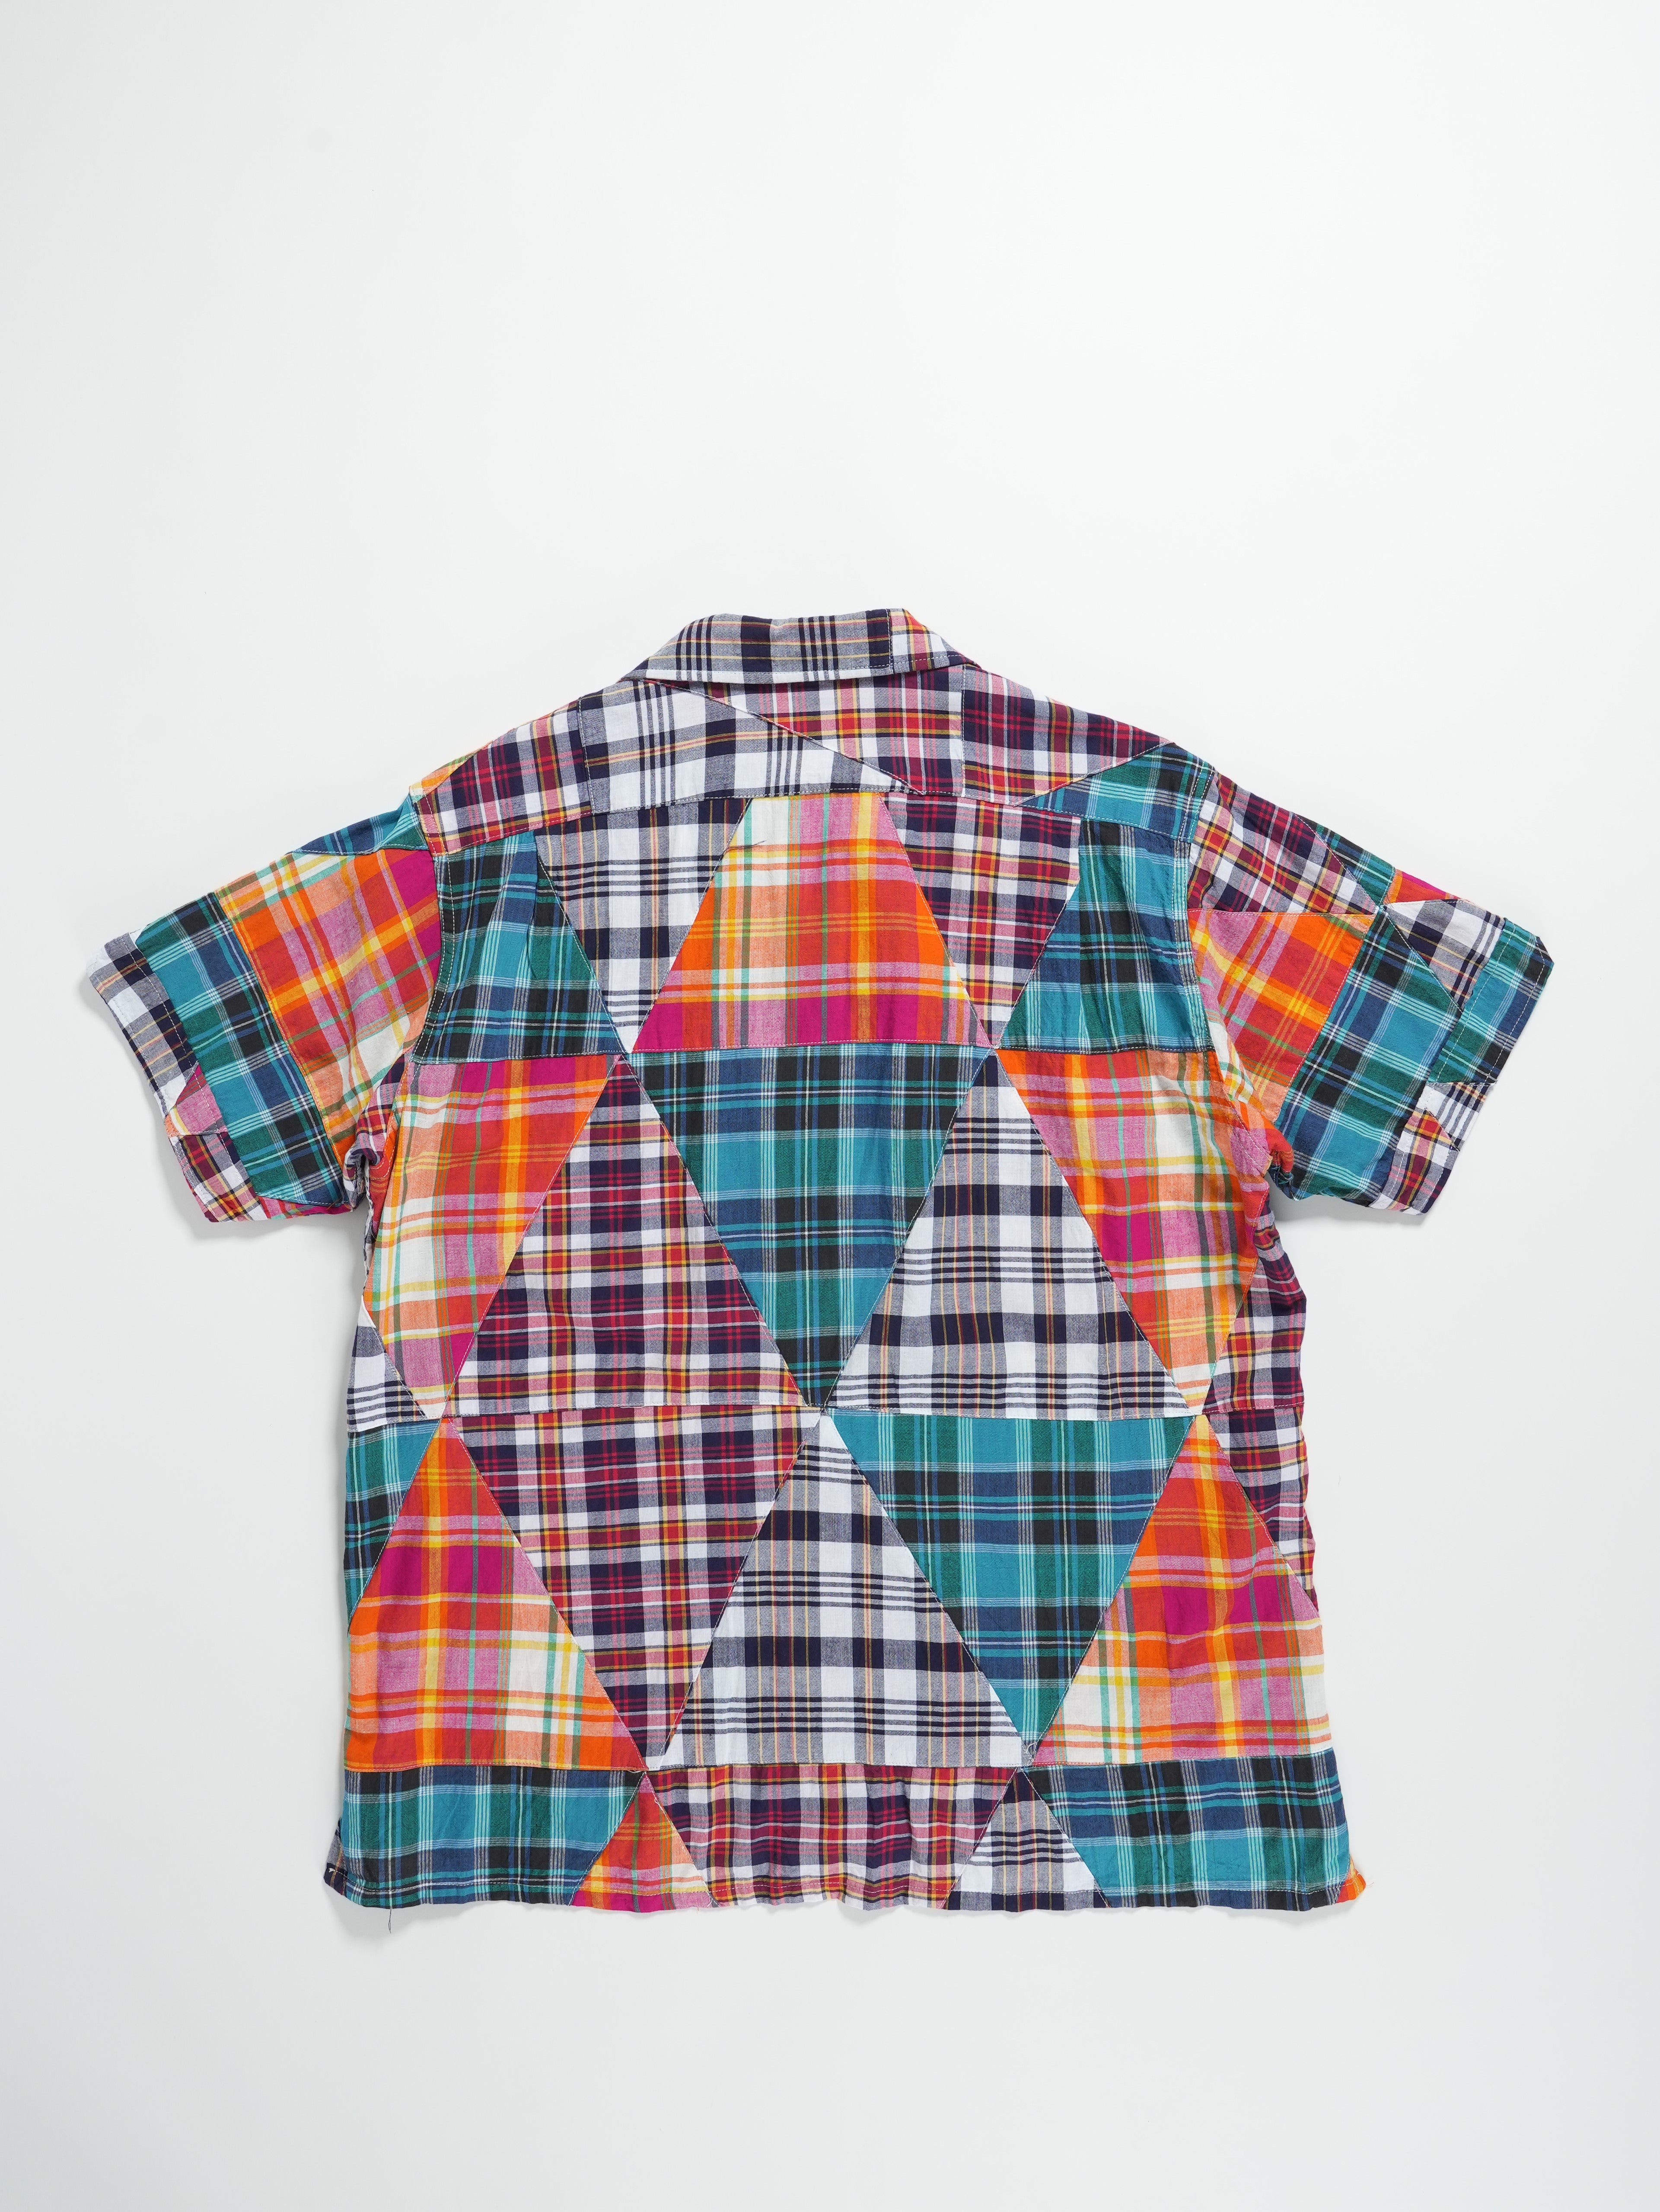 Camp Shirt - Multi Color Triangle Patchwork